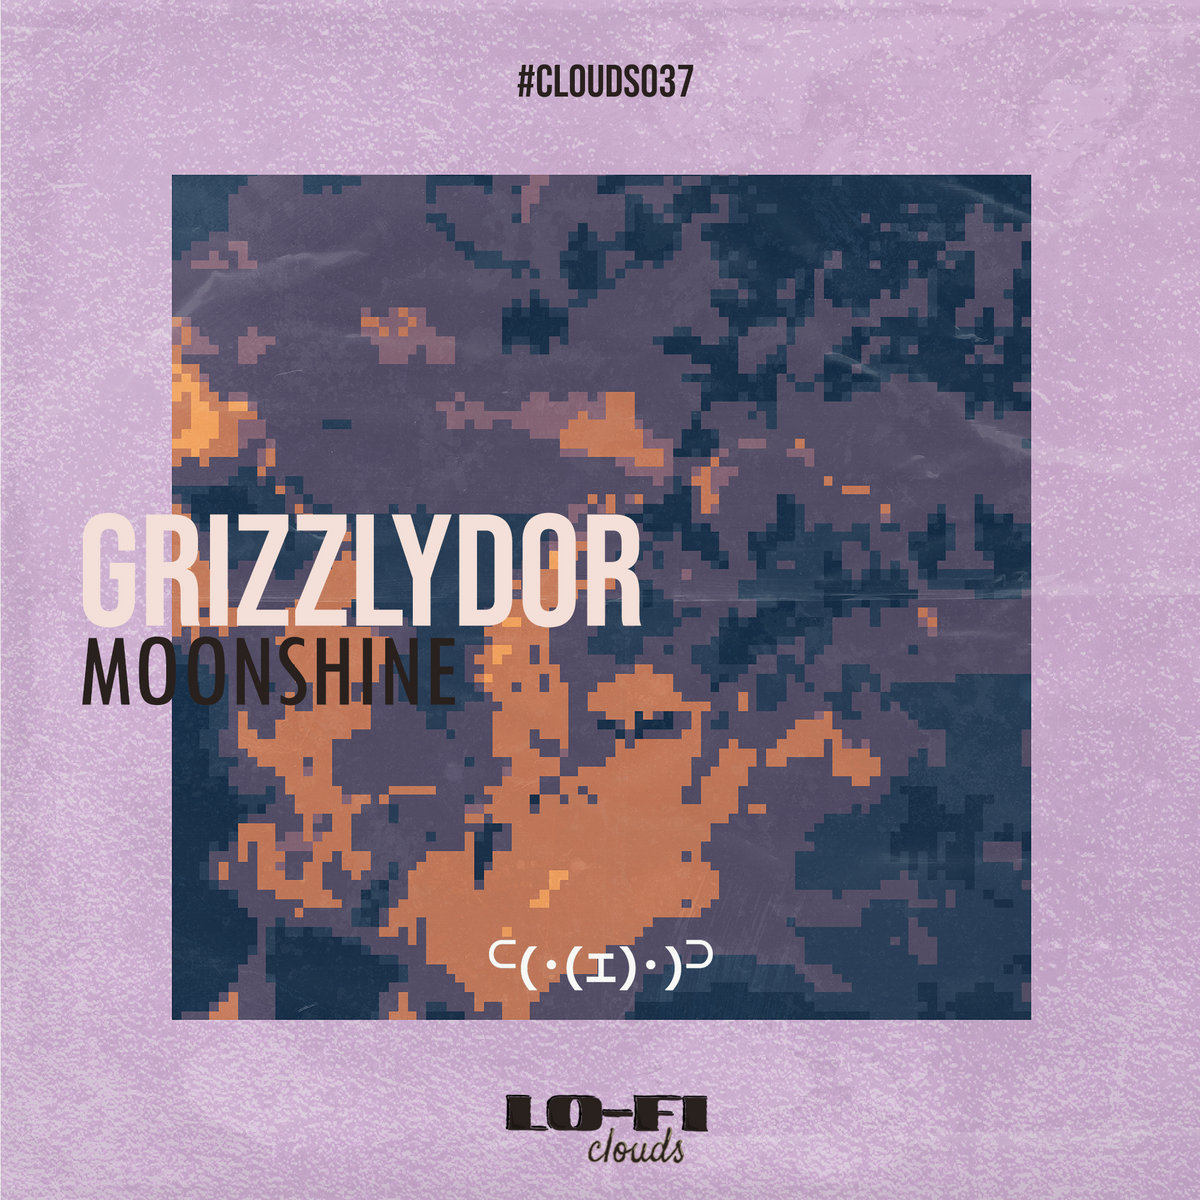 Grizzlydor - Moonshine - CLOUDS037 - Coverart